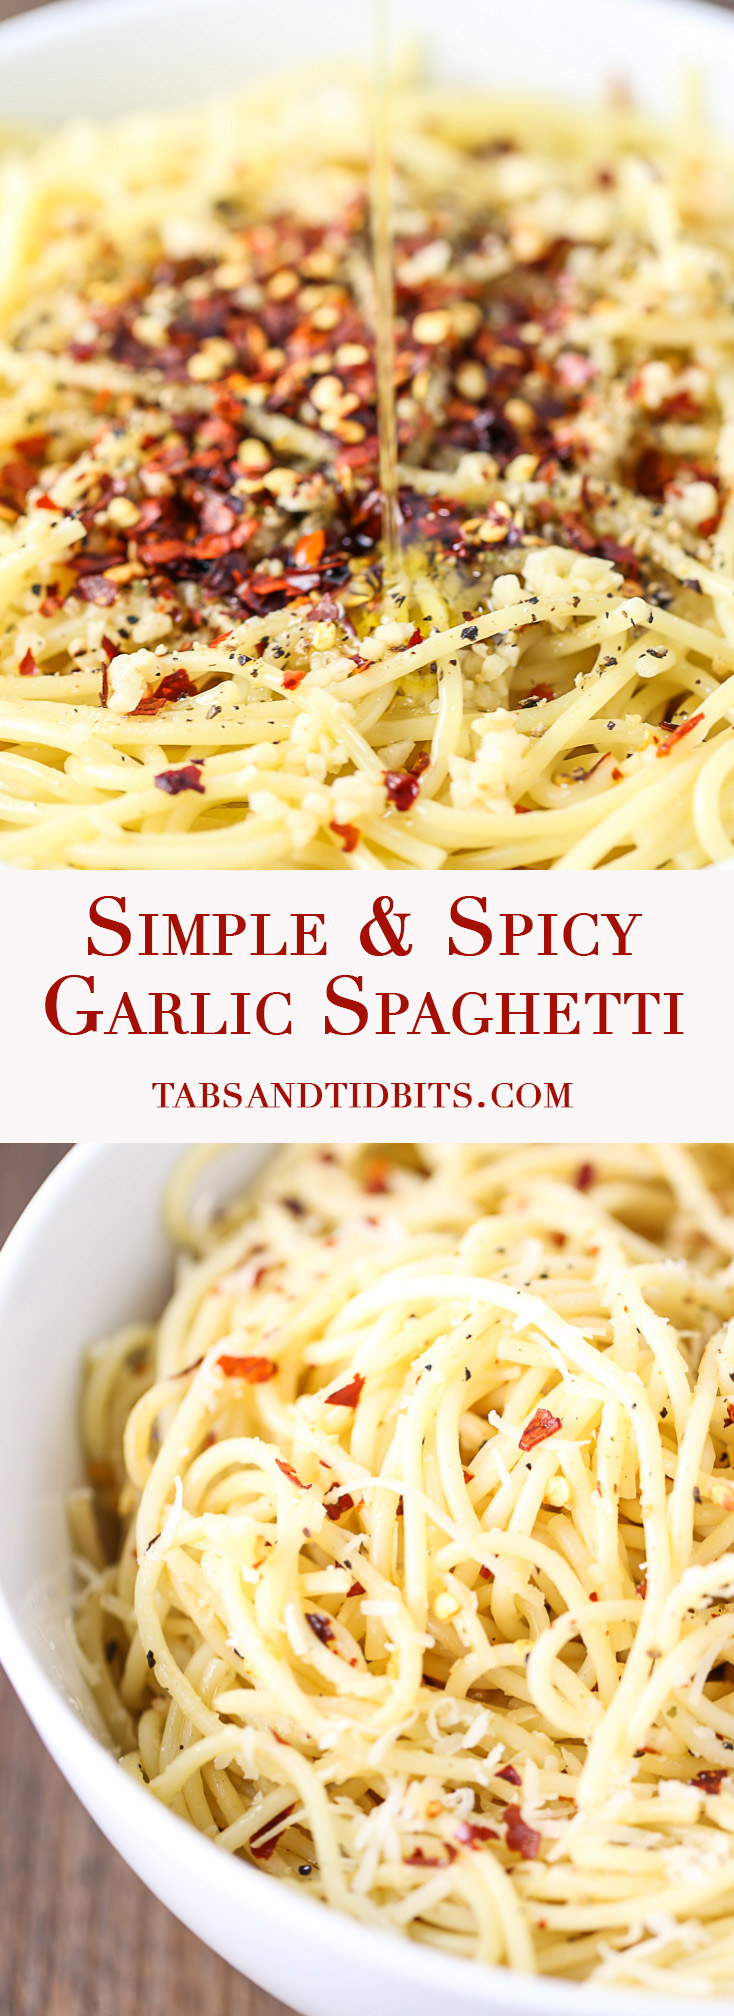 Simple & Spicy Garlic Spaghetti - A quick pasta dish that pleases spicy and garlic lovers alike!